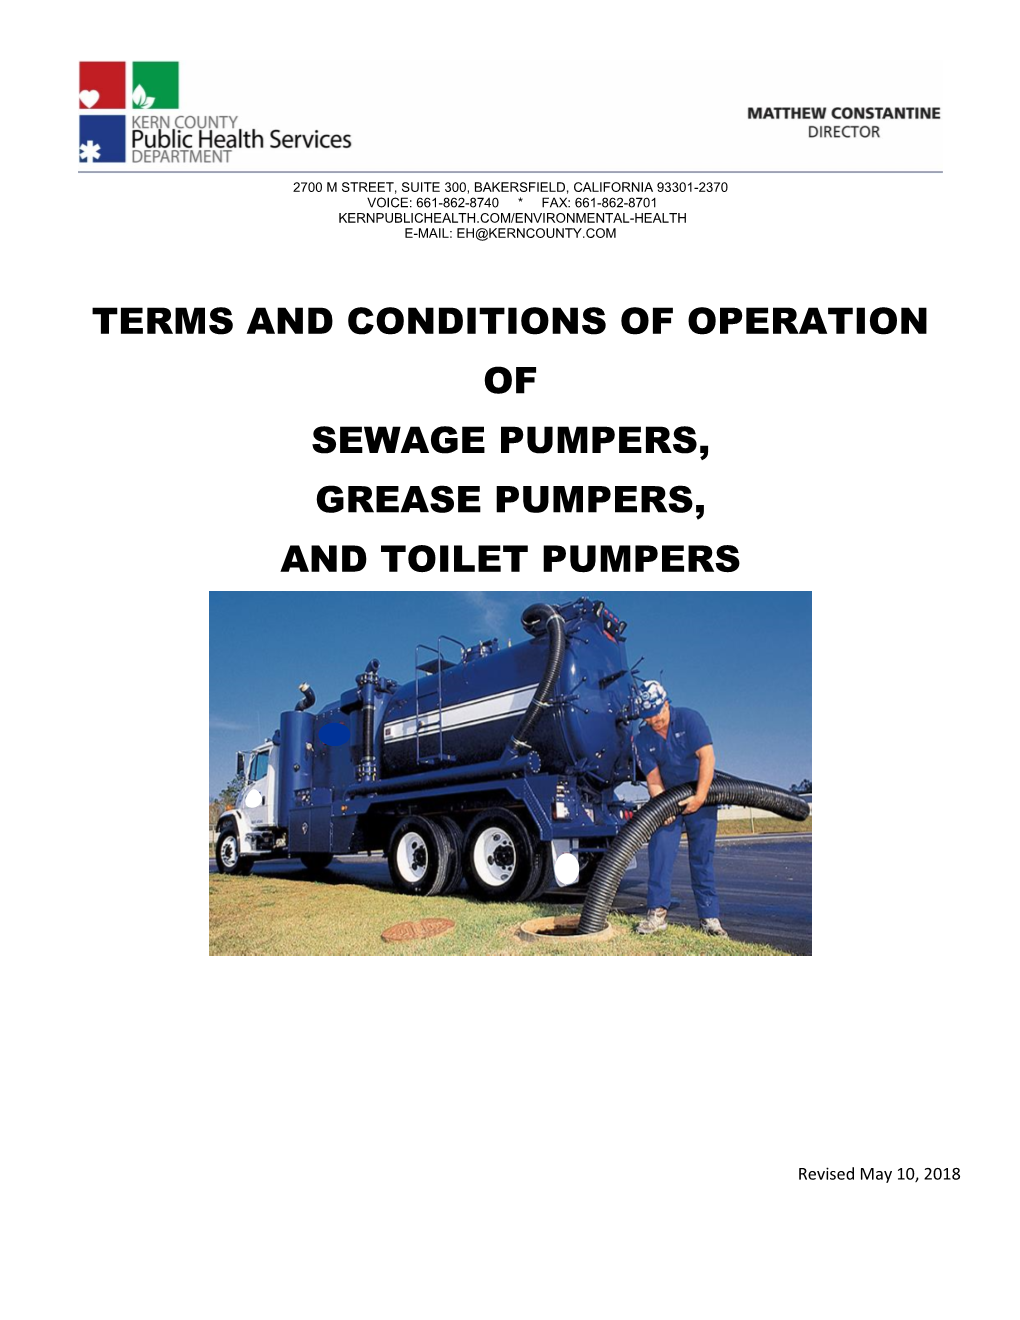 Kern County Pumper Terms and Conditions of Operation